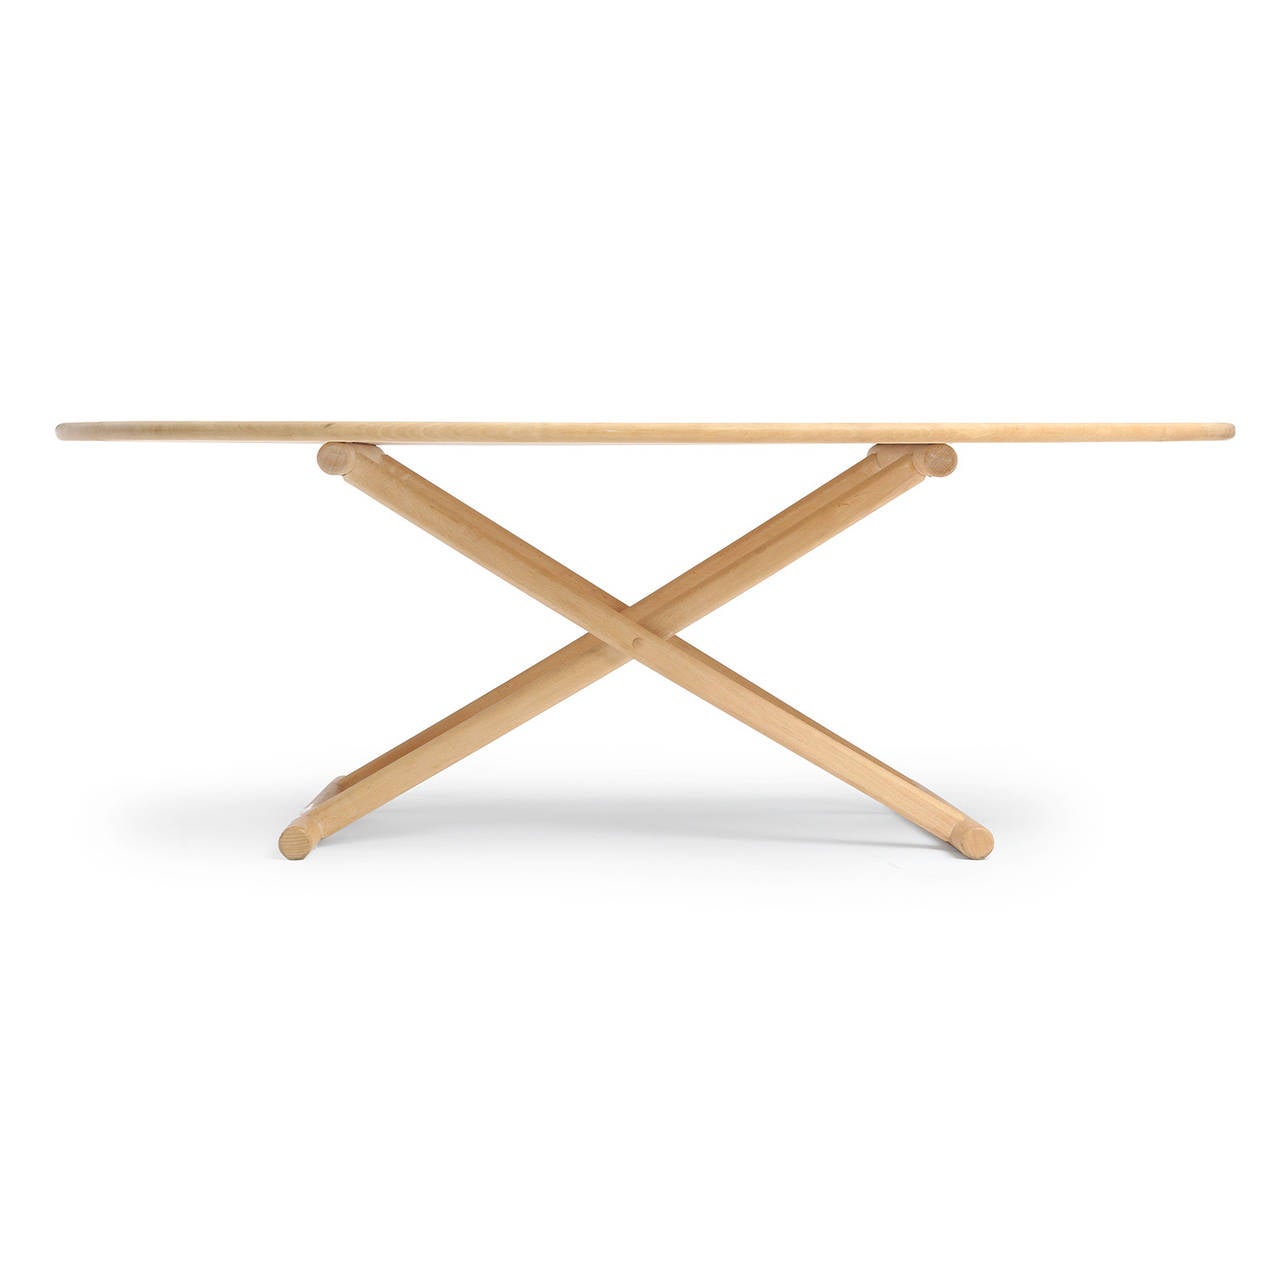 A low table or coffee table in white beech having an exposed X-based structure with sled legs supporting an oval top.